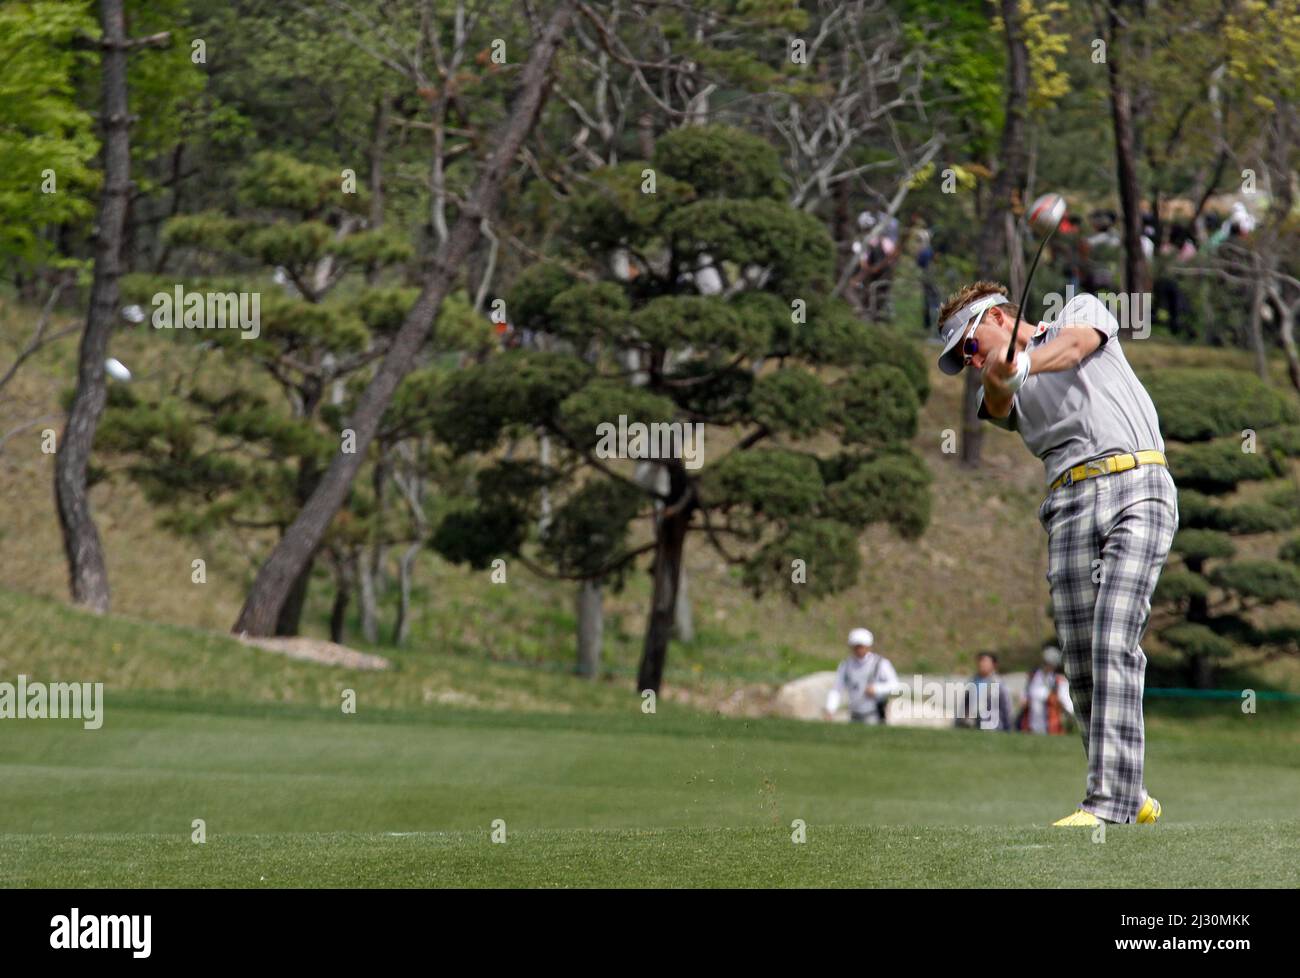 April 29, 2012-South Korea, Icheon : Ian Poulter of England in action during the fourth round of the Ballantine's Championship at Blackstone Golf Club. Stock Photo